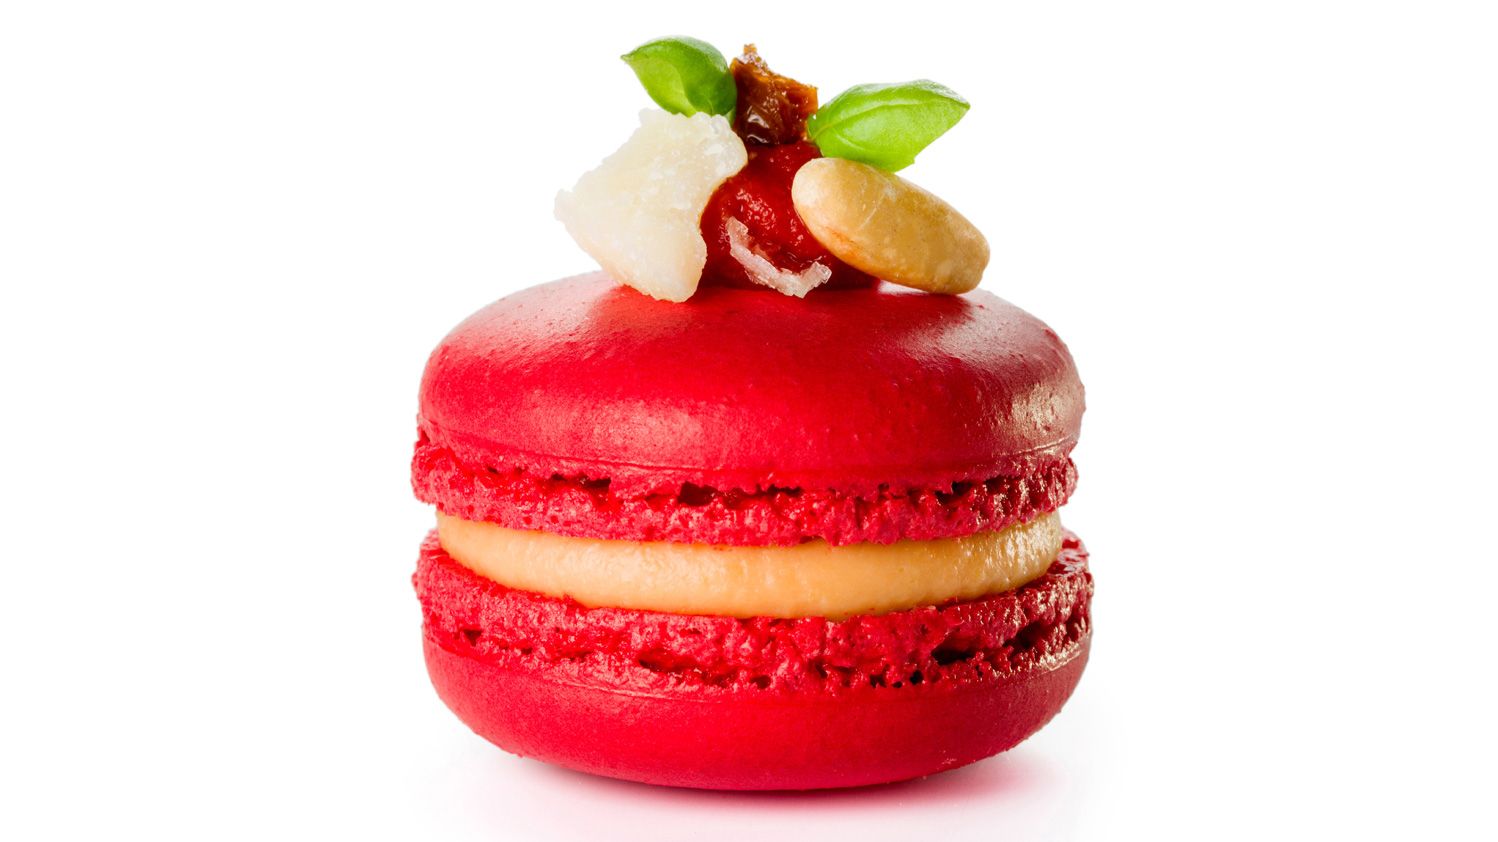 Red tomato and Zephyr™ macaron